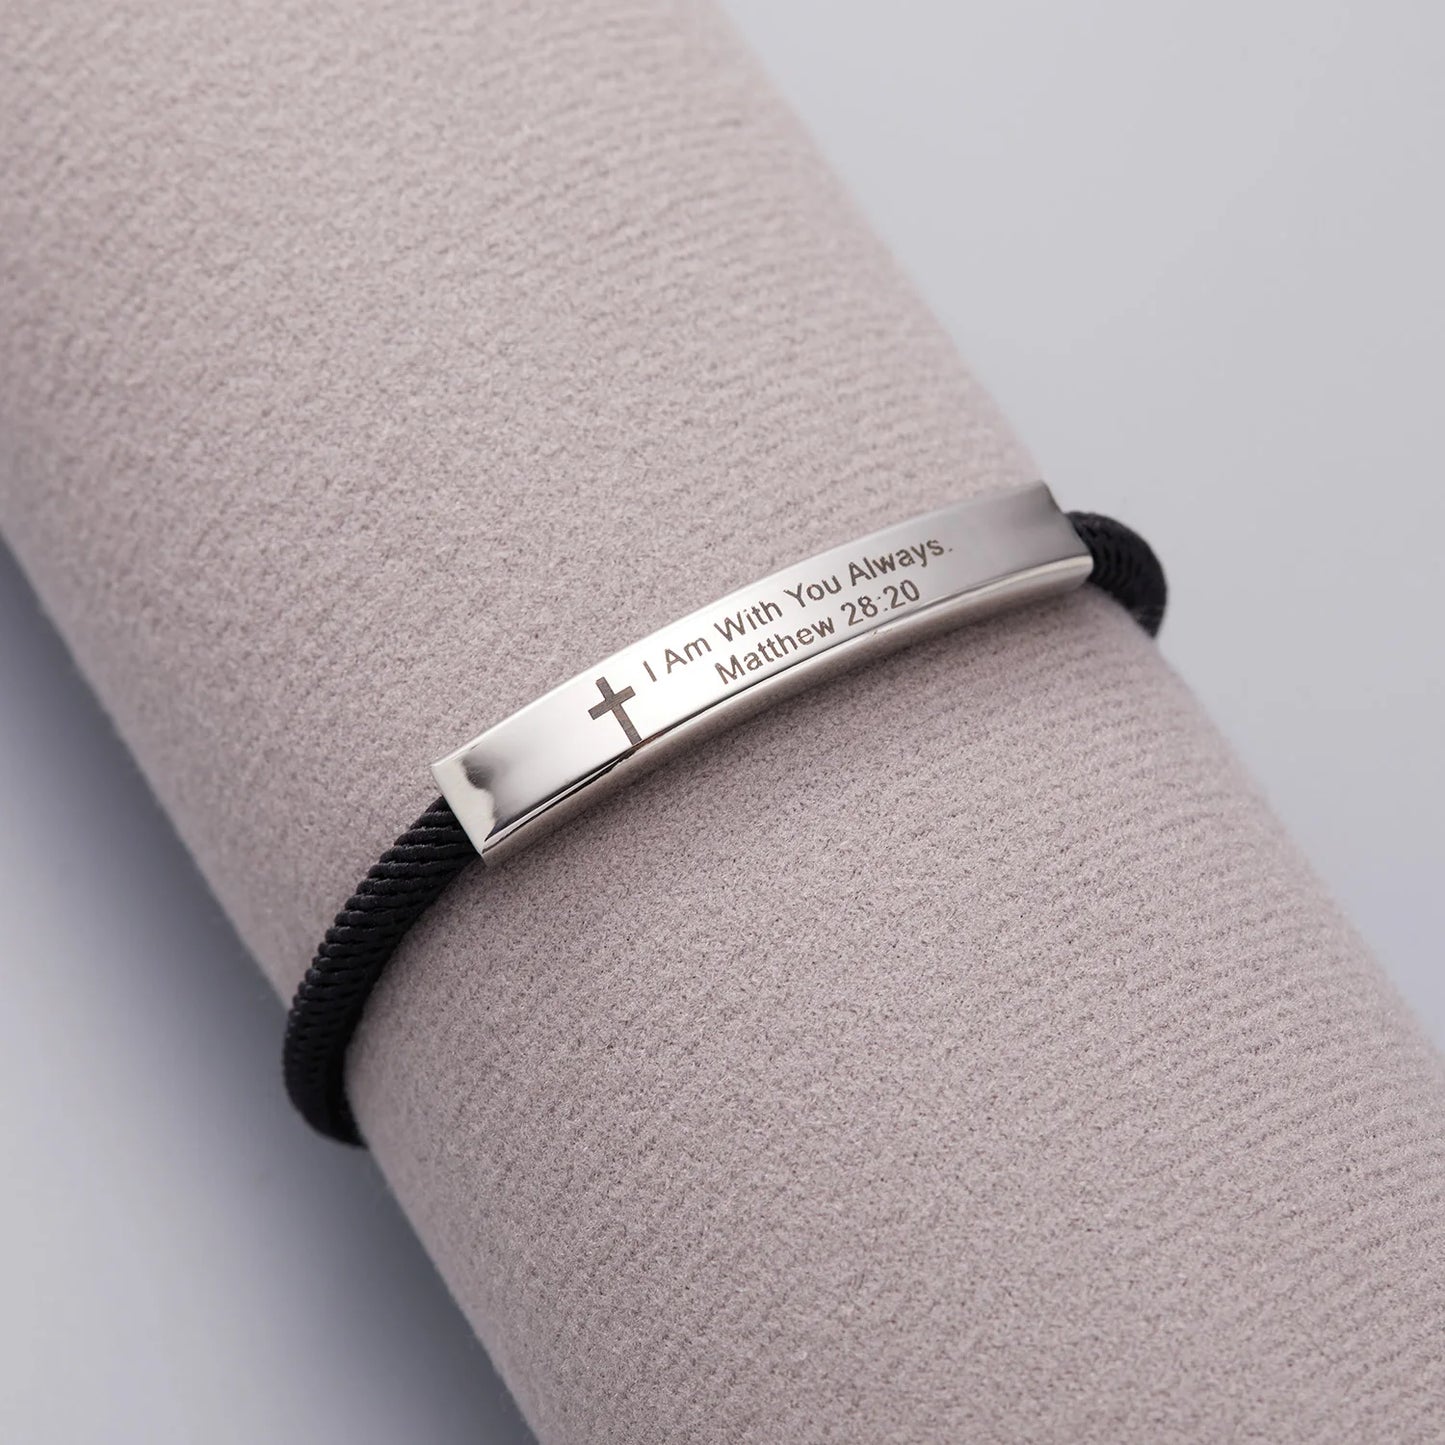 New Trendy Cross Bible Laser Engraving Letters Bracelet - Stainless Steel Bracelet for Men and Women, Personality Jewelry Gift